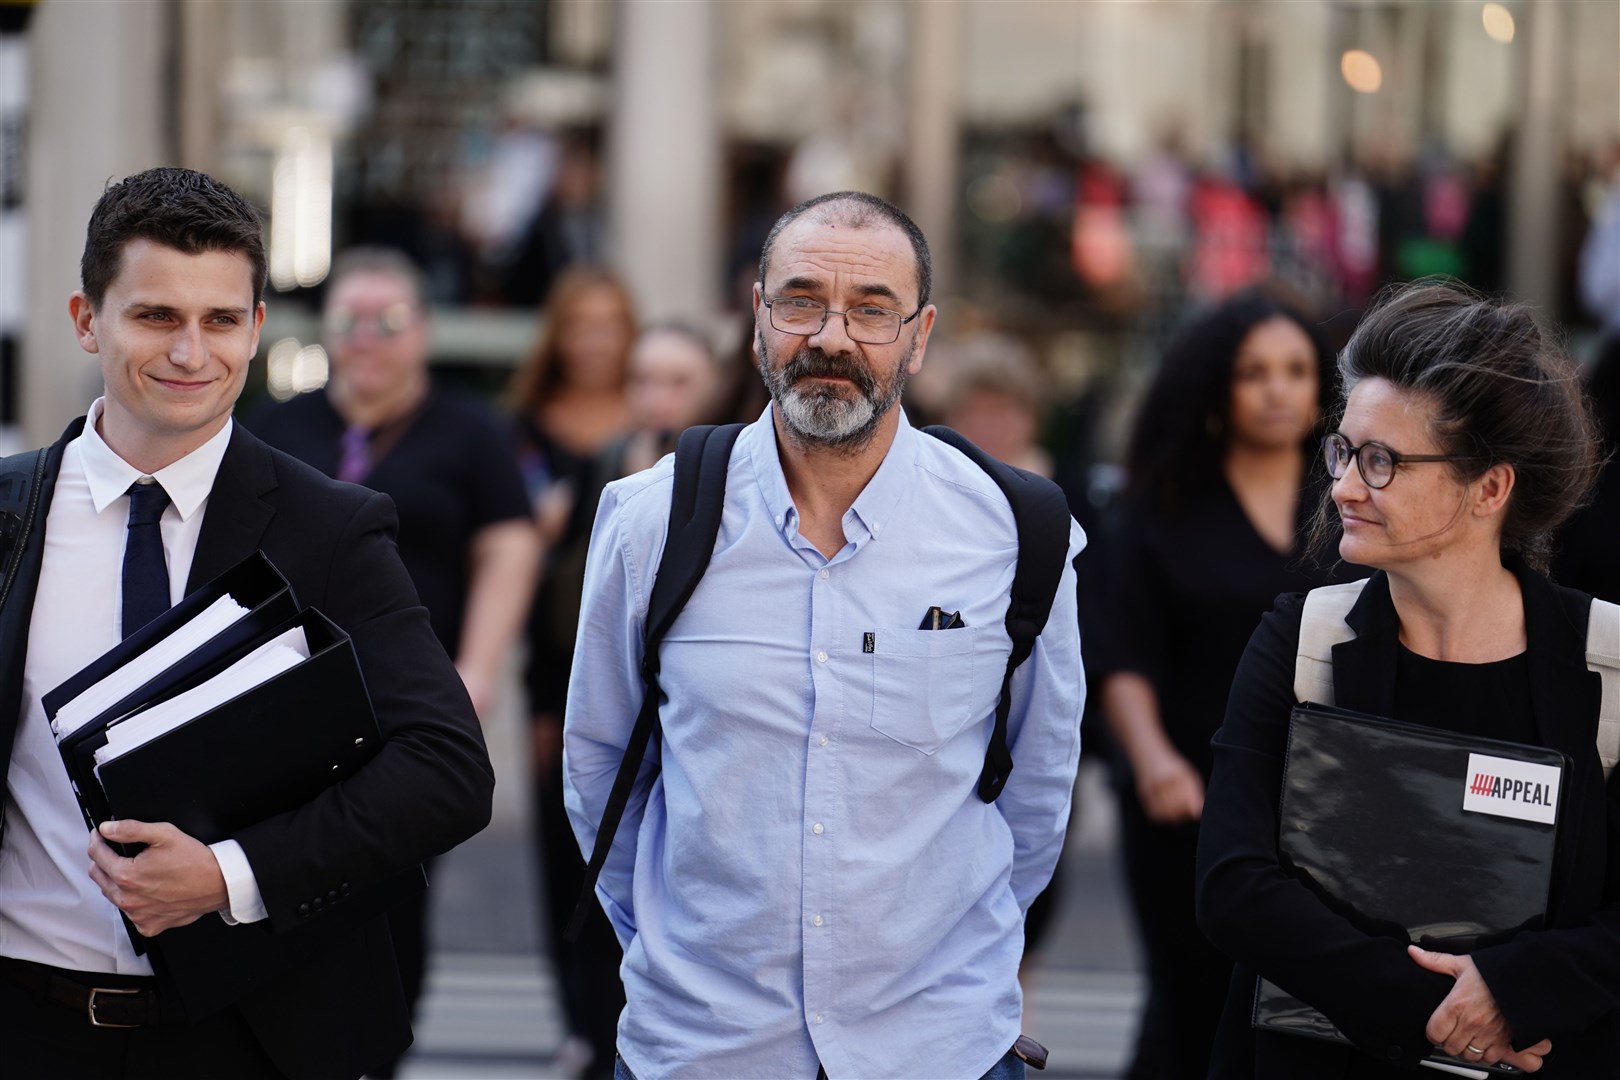 Andrew Malkinson, centre, arriving at the Royal Courts of Justice in London, ahead of his hearing at the Court of Appeal over his 2003 rape conviction (Jordan Pettitt/PA)